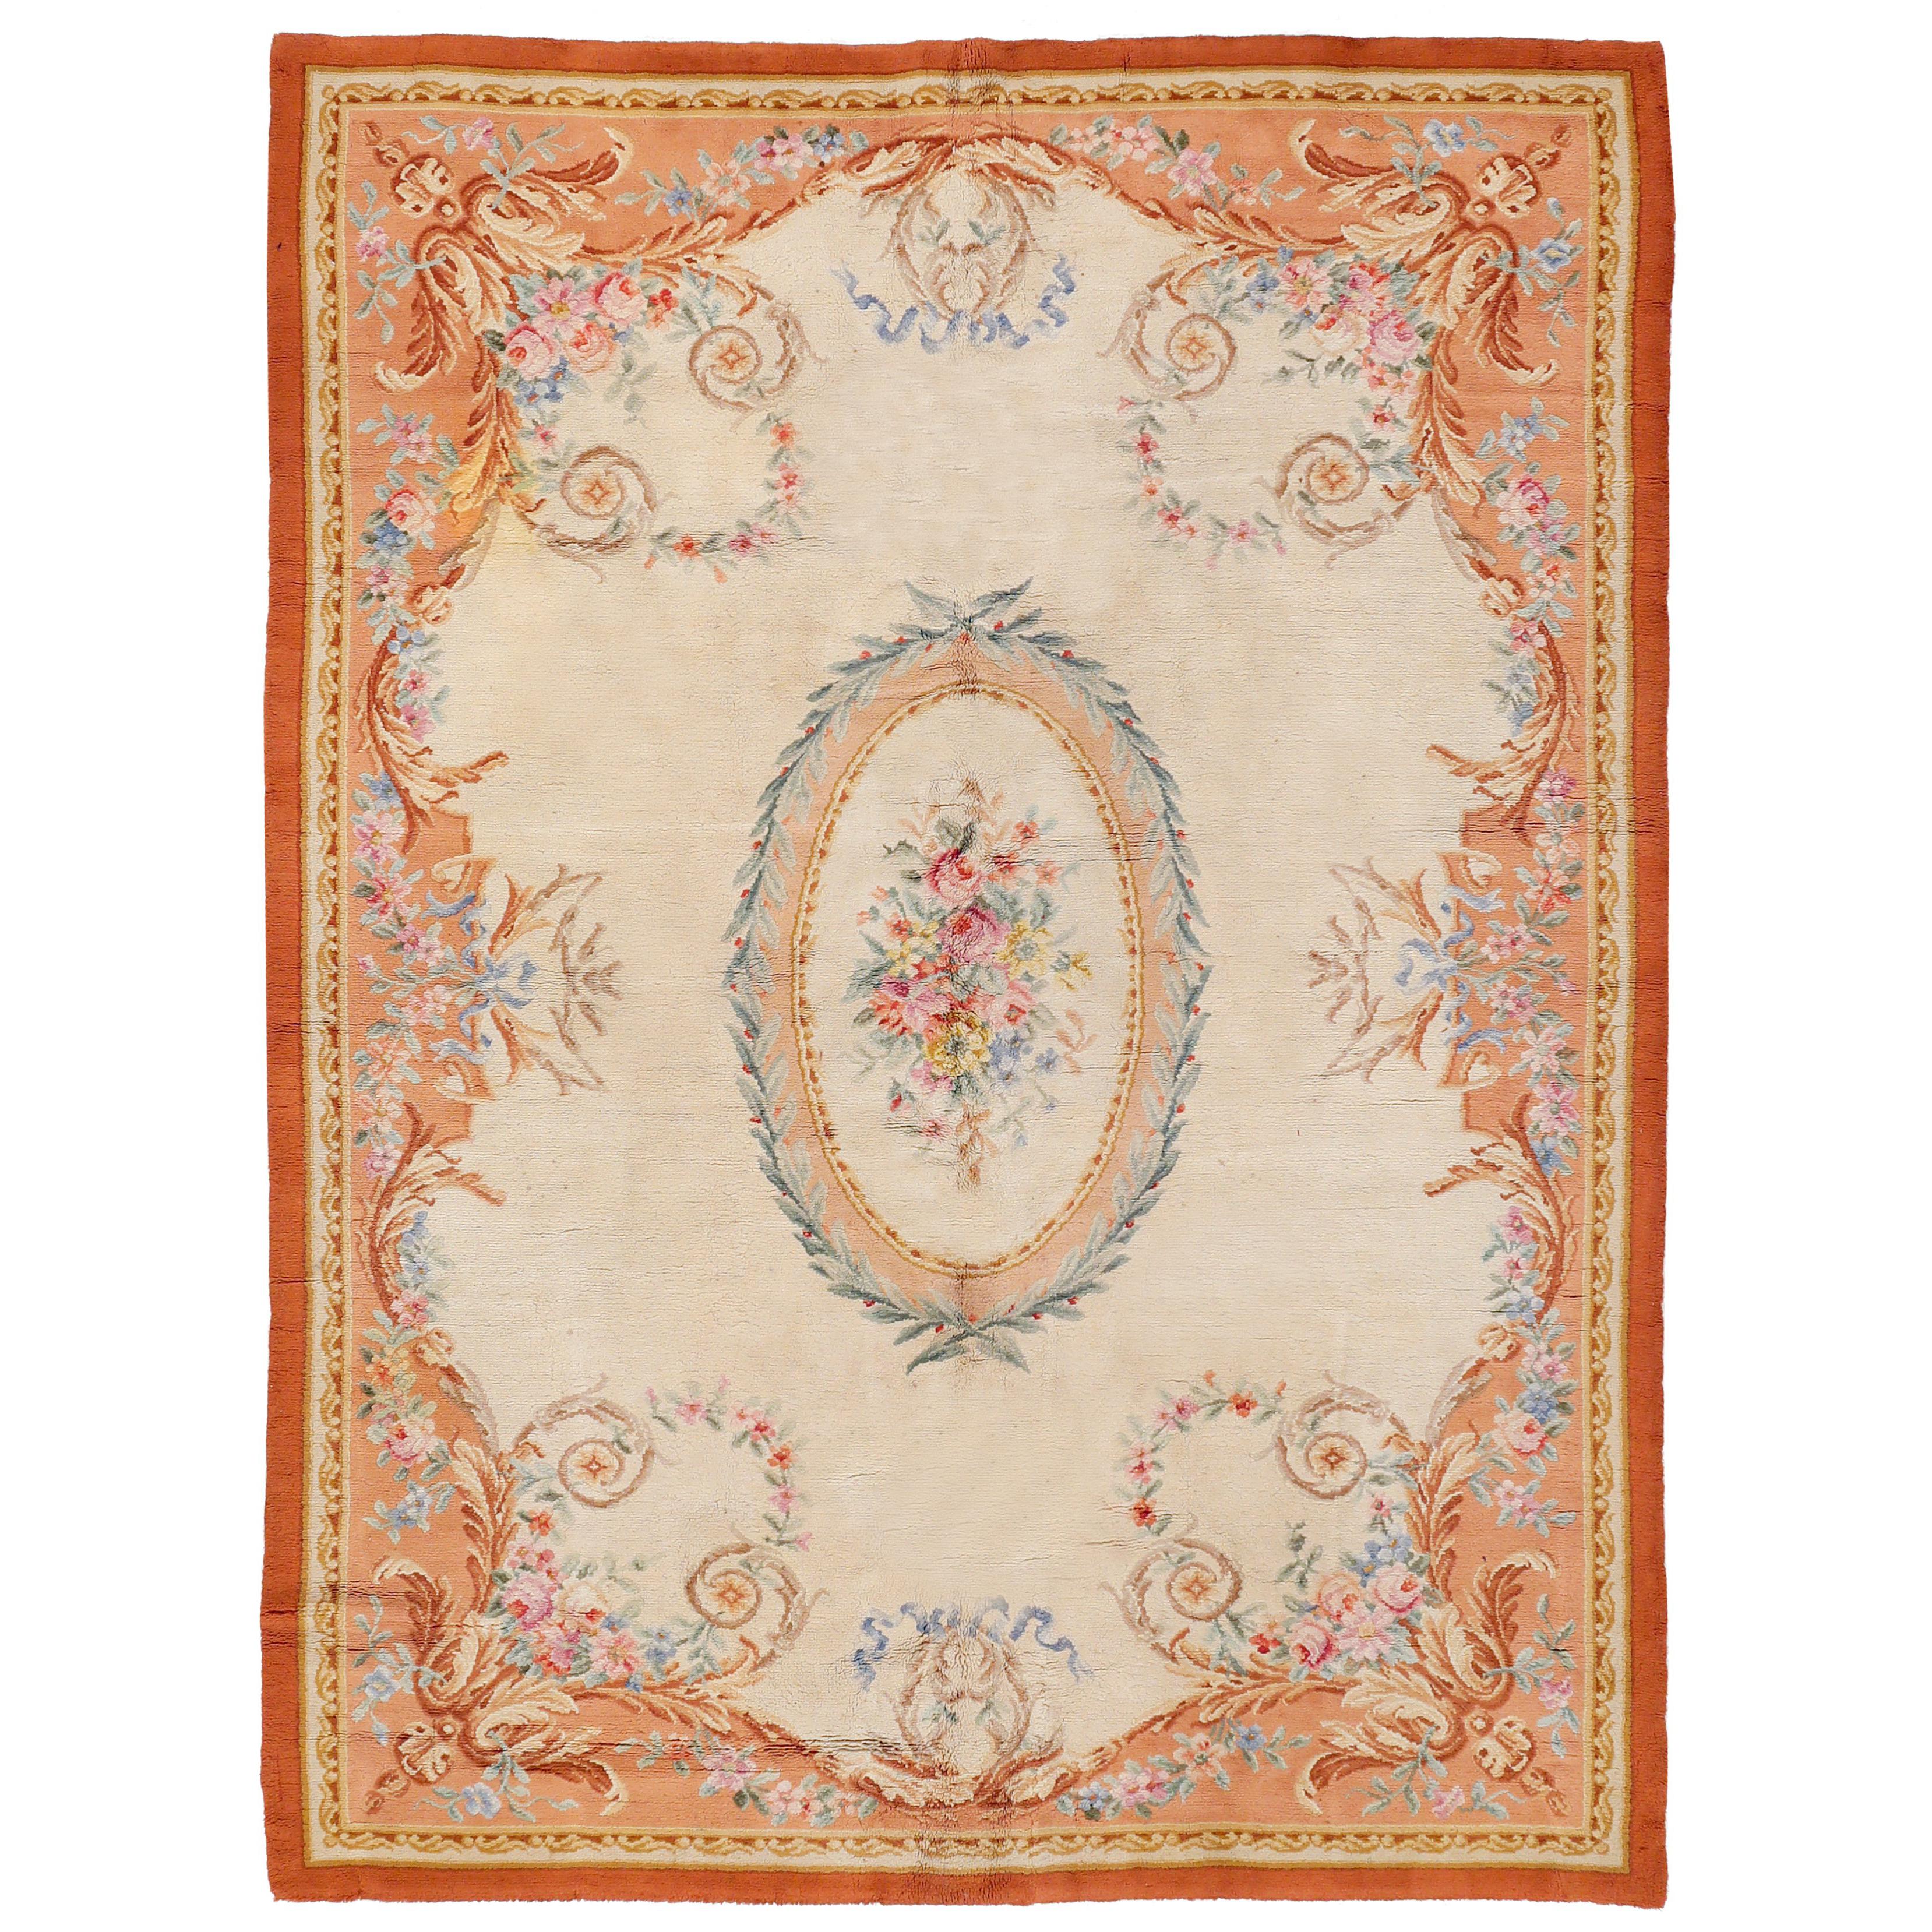 Antique French Savonnerie Rug with Ivory Background